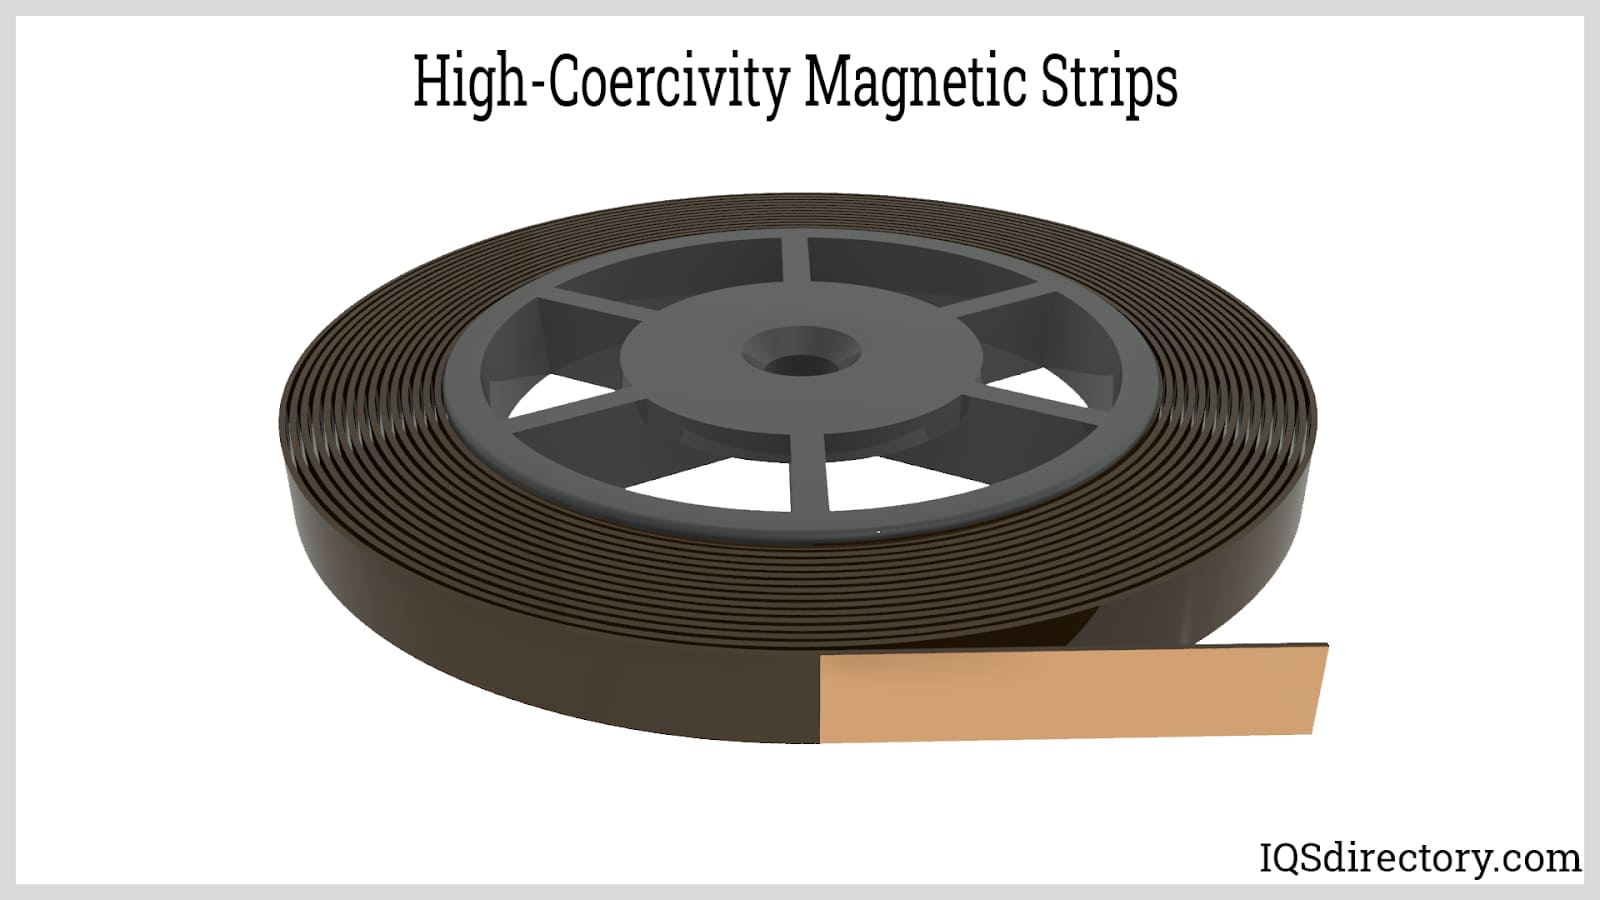 Basic Use of Flexible Magnets  Benefits & Application of Flexible Magnets